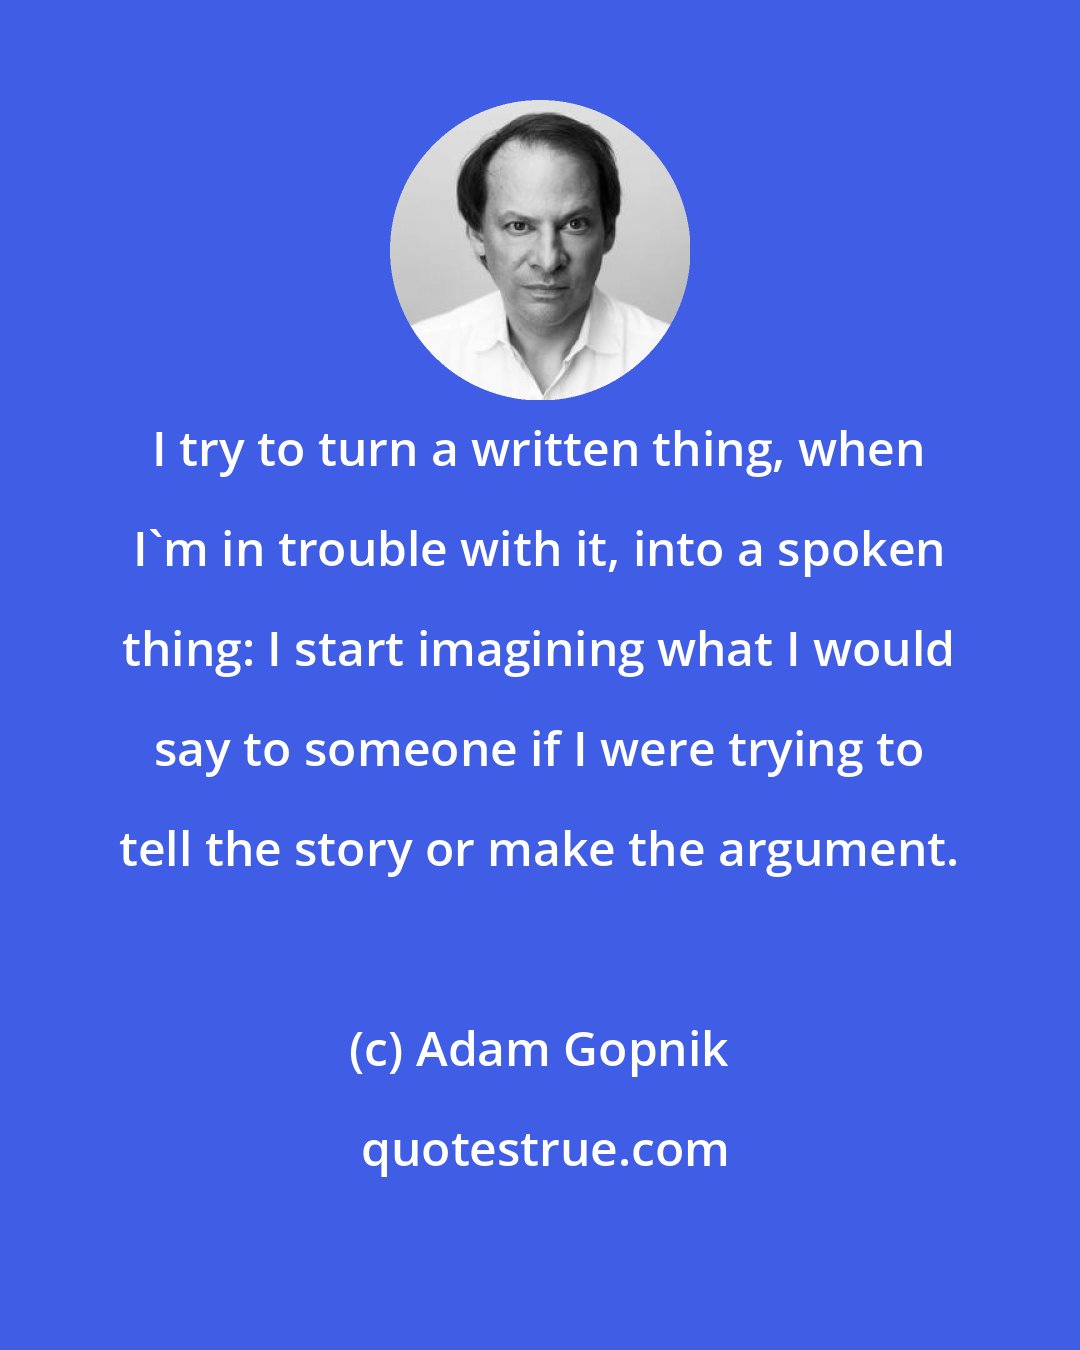 Adam Gopnik: I try to turn a written thing, when I'm in trouble with it, into a spoken thing: I start imagining what I would say to someone if I were trying to tell the story or make the argument.